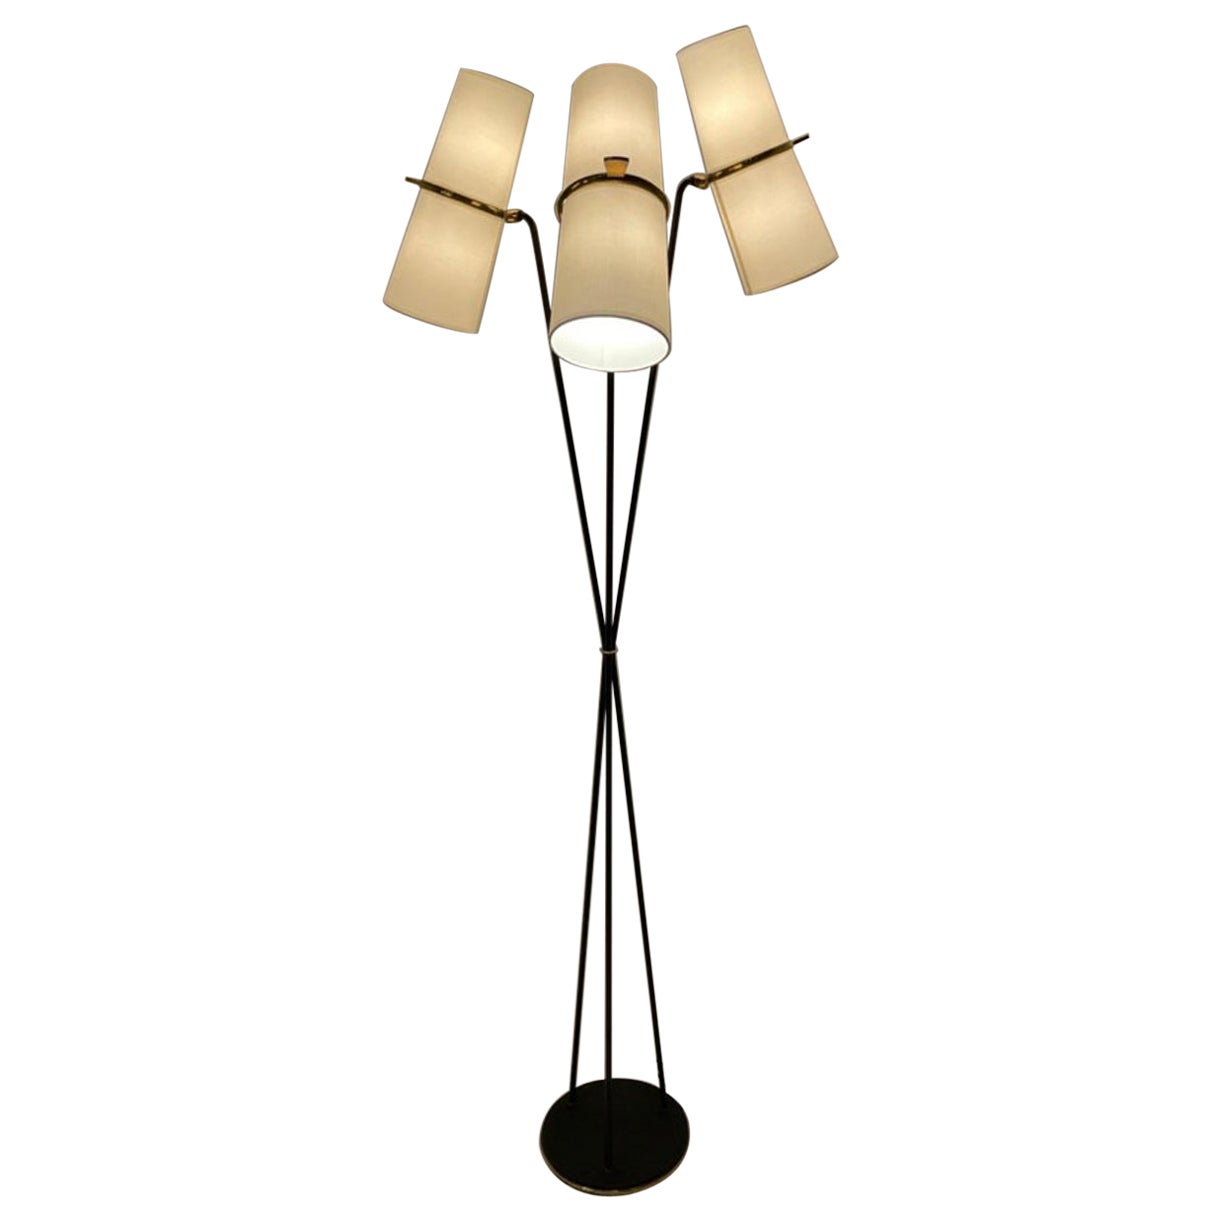  Floor Lamps by Lunel